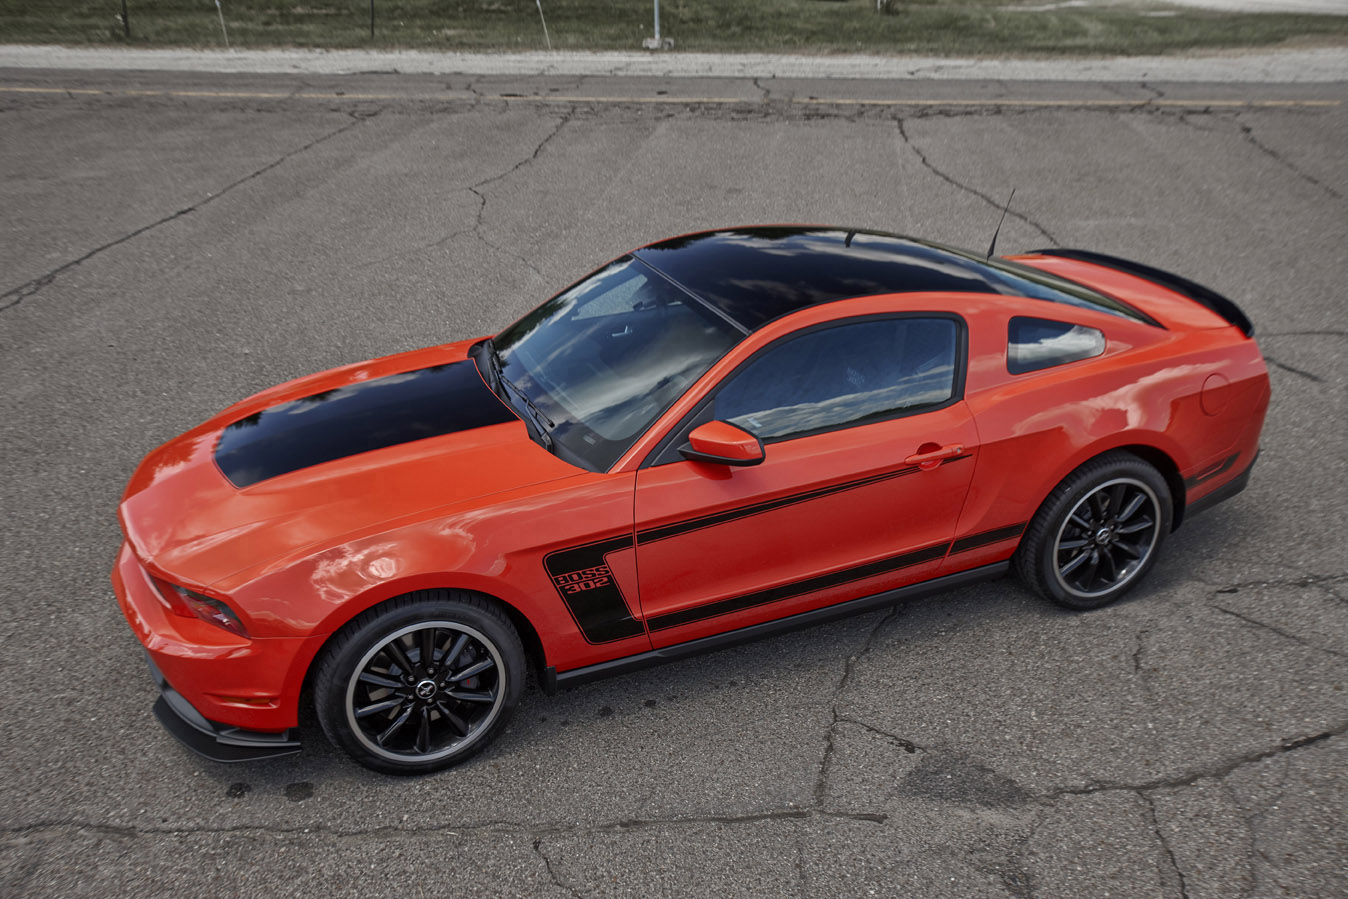 2012 To Buy Nominee: 2012 Ford Boss 302